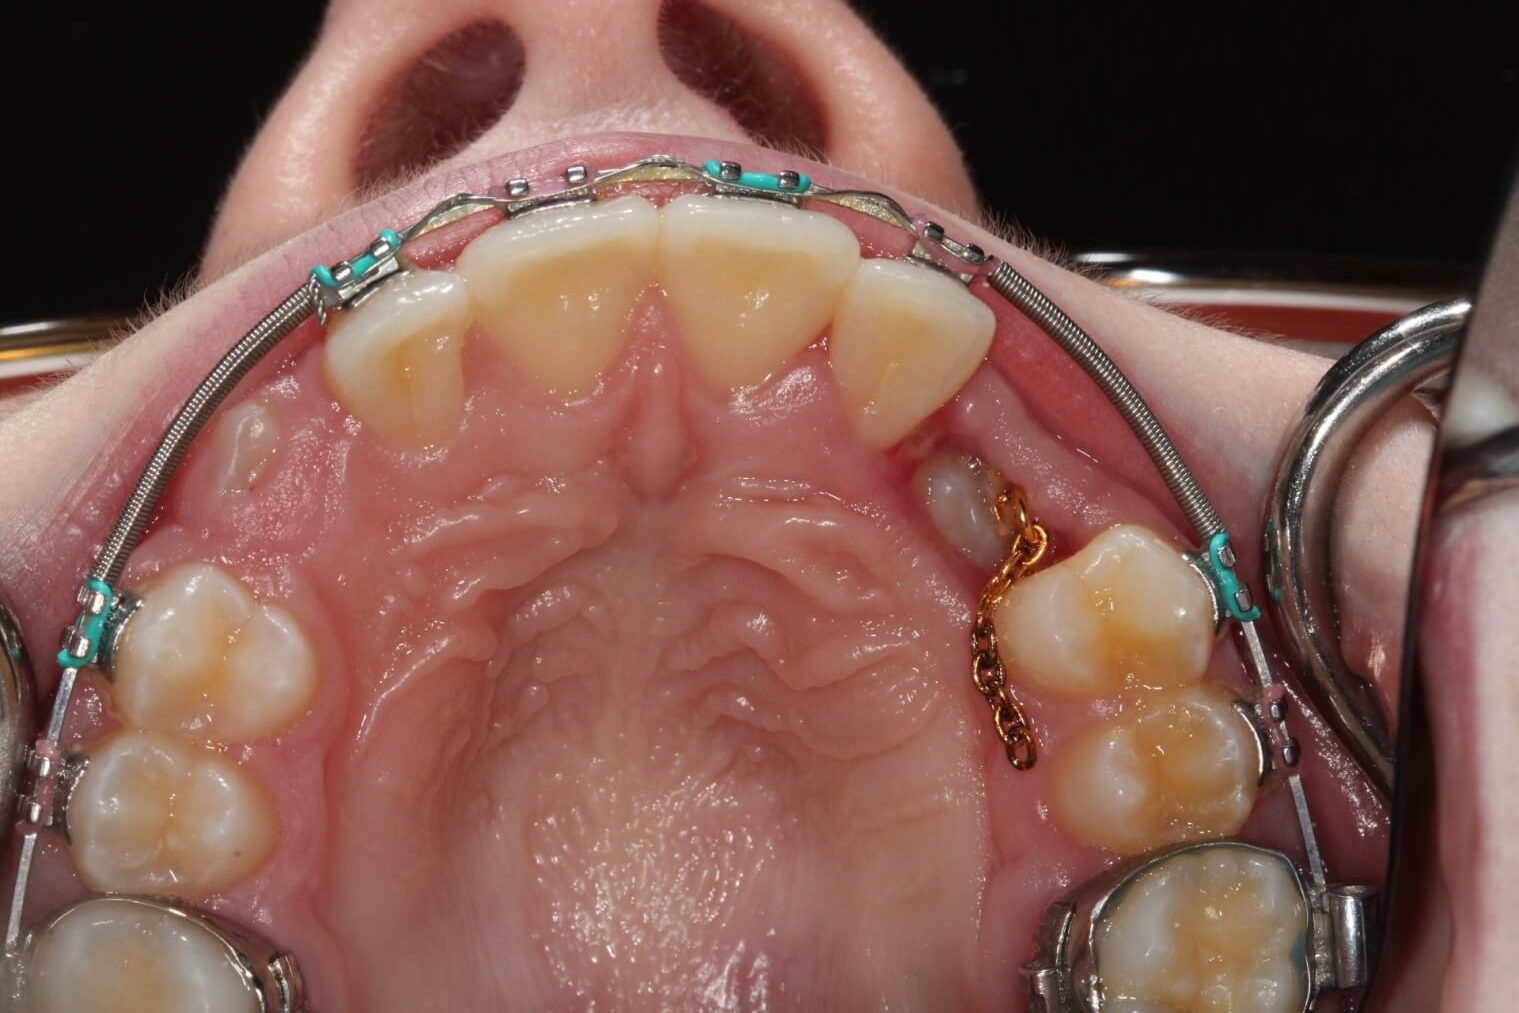 Tooth Exposure for Braces